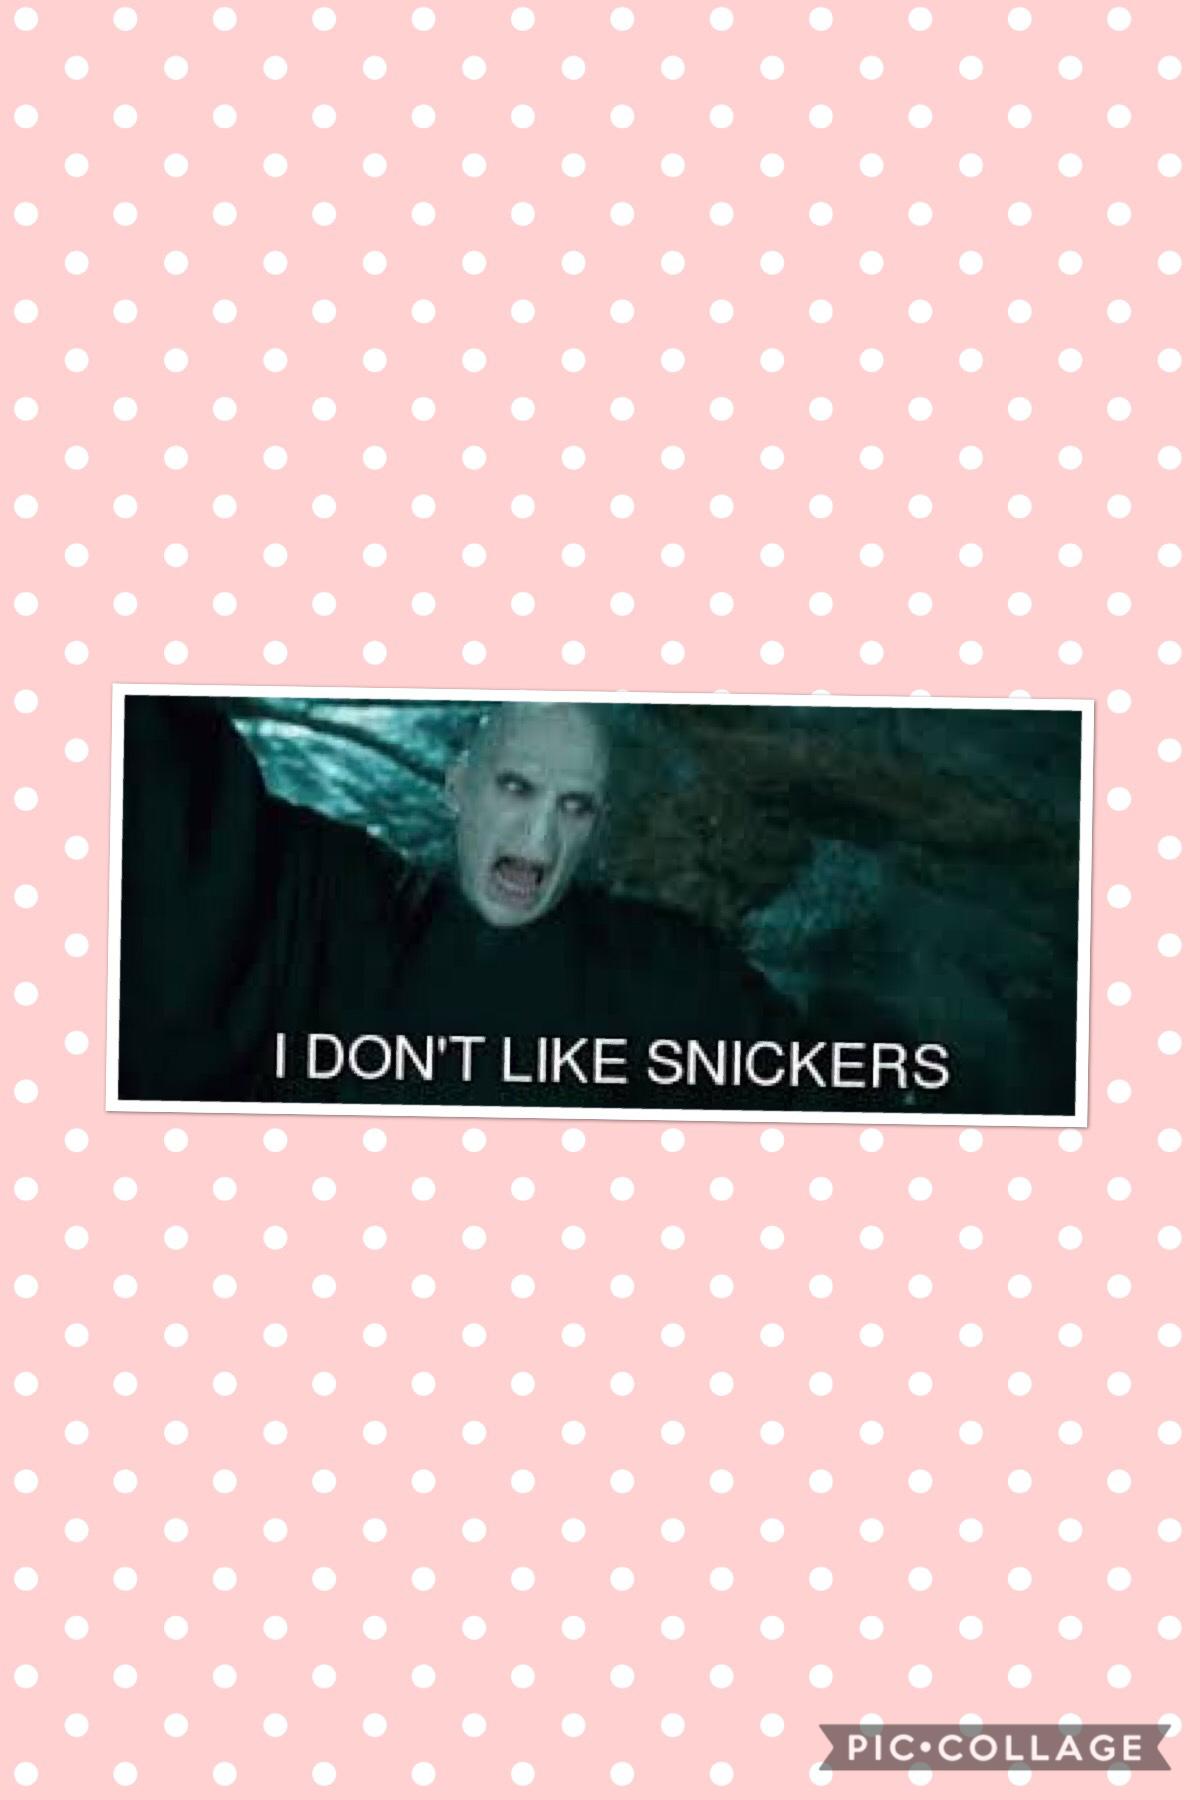 I don’t like snickers